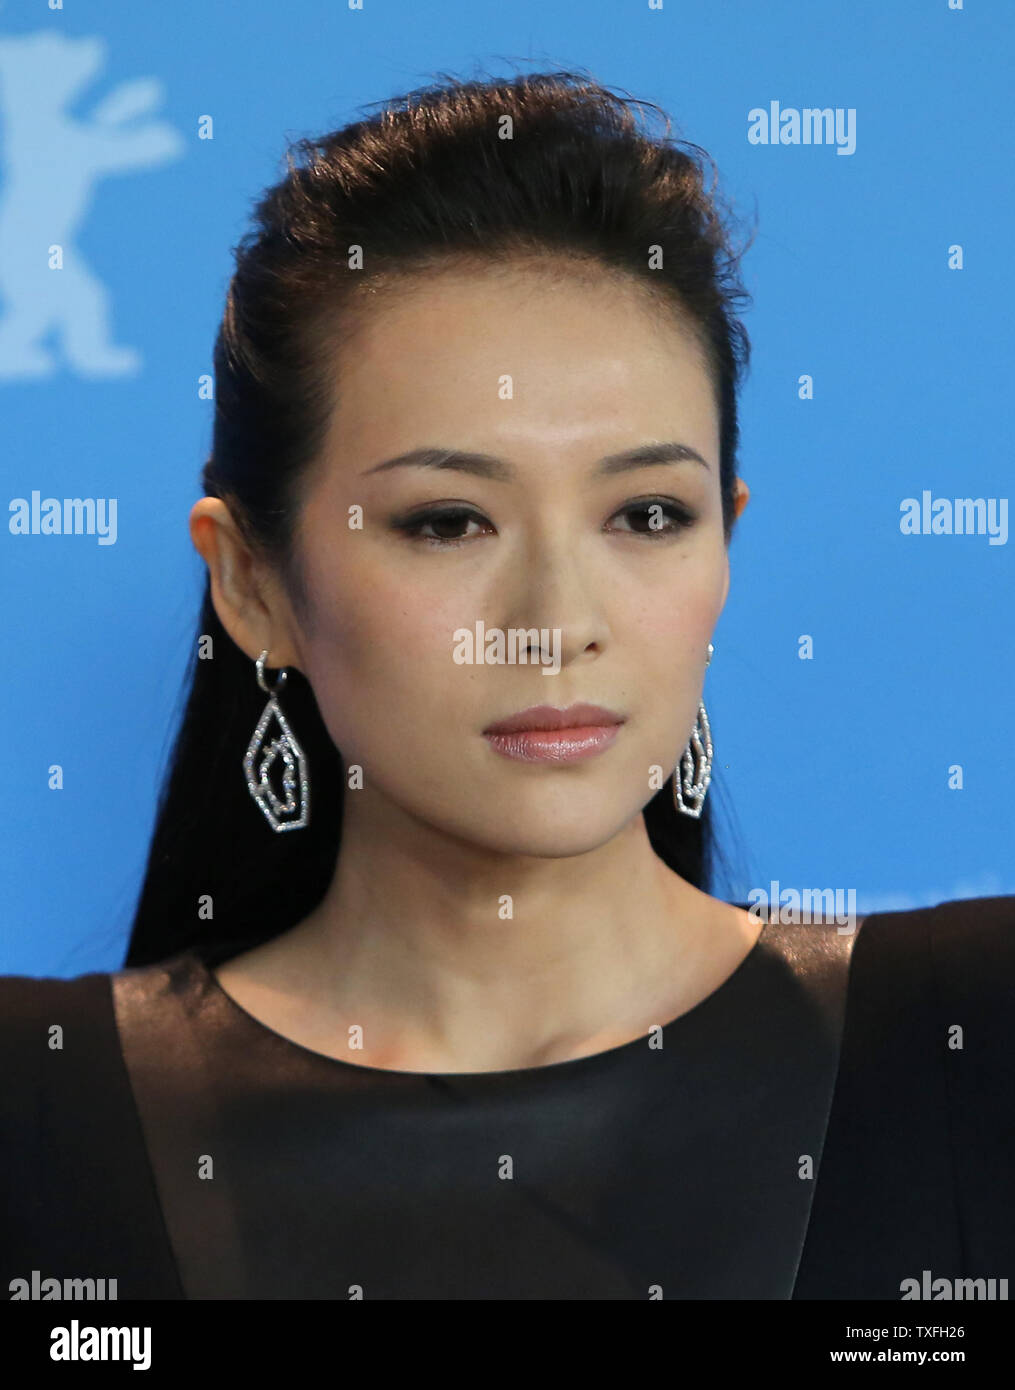 Zhang Ziyi arrives at the photo call for the film 'The Grandmaster' during the opening of the 63rd Berlinale Film Festival in Berlin on February 7, 2013.   UPI/David Silpa Stock Photo